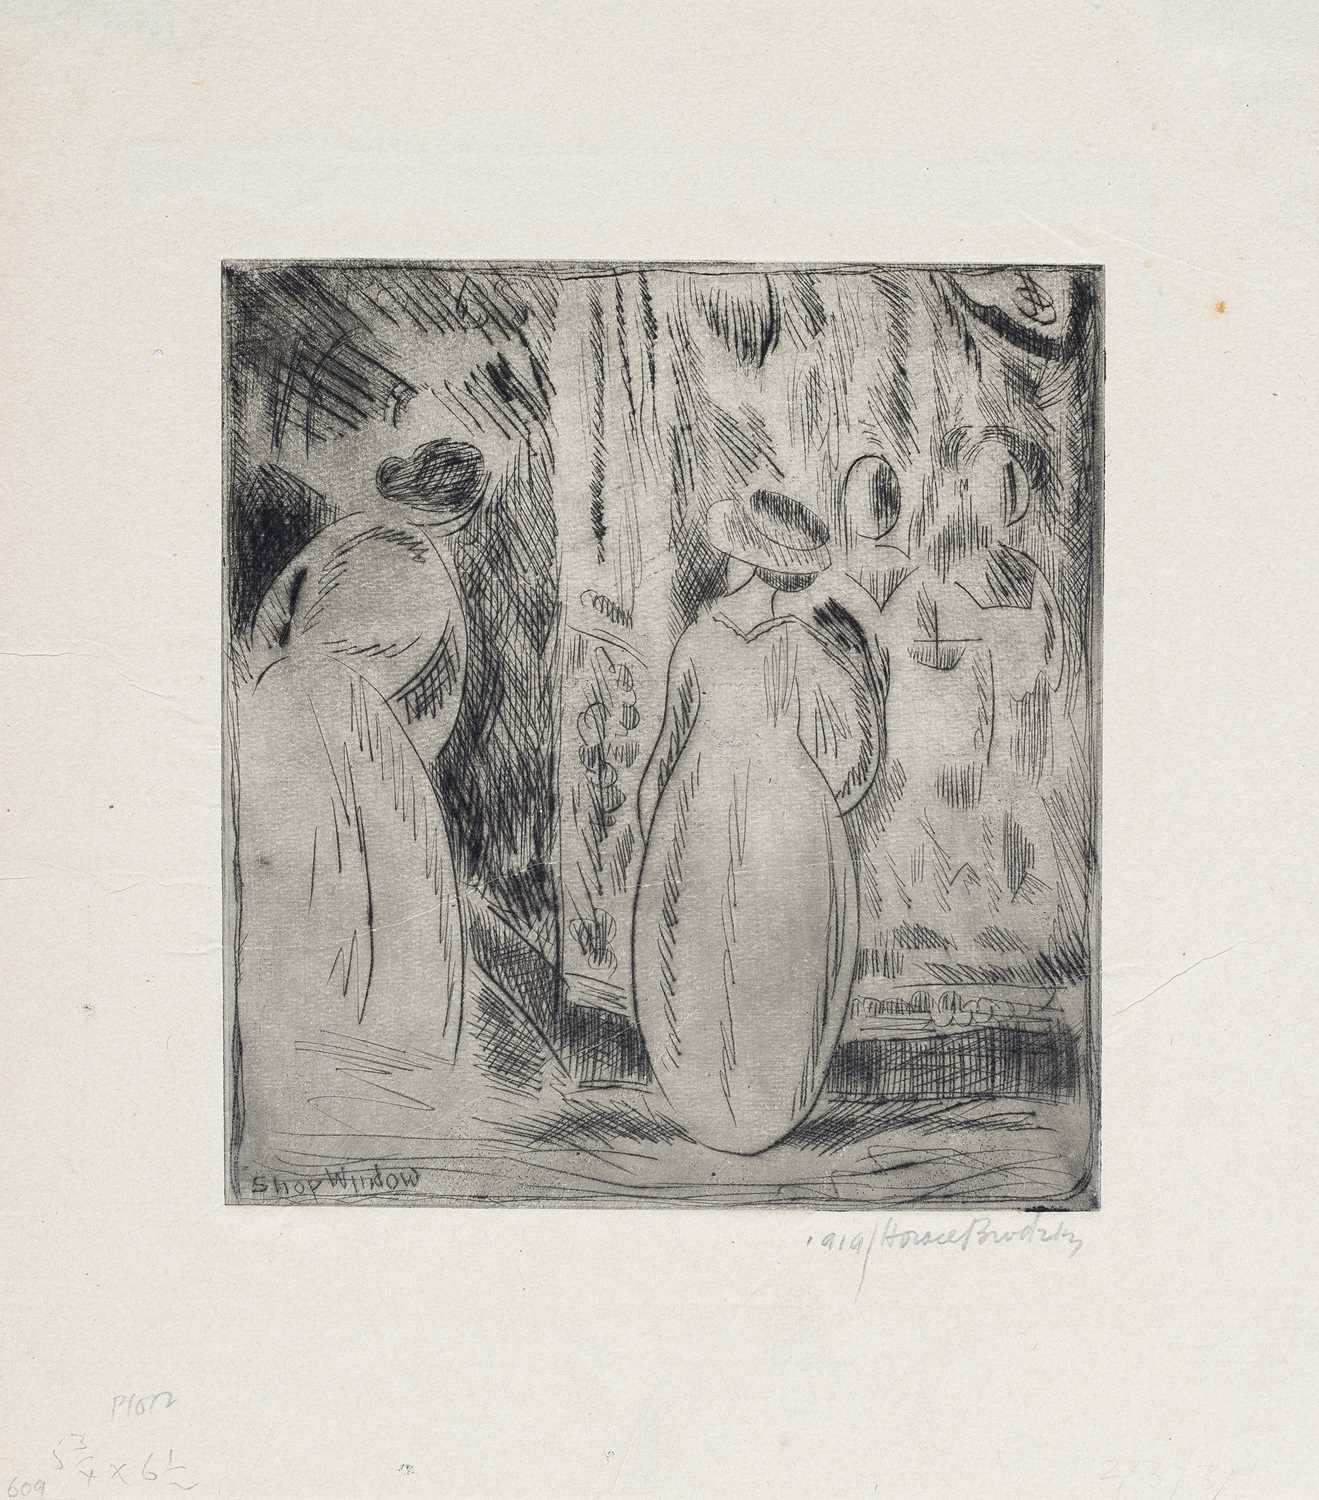 Horace Brodzky (1885-1969) Shop Window signed in pencil (lower right) etching 24 x 21cm, unframed. - Image 2 of 2